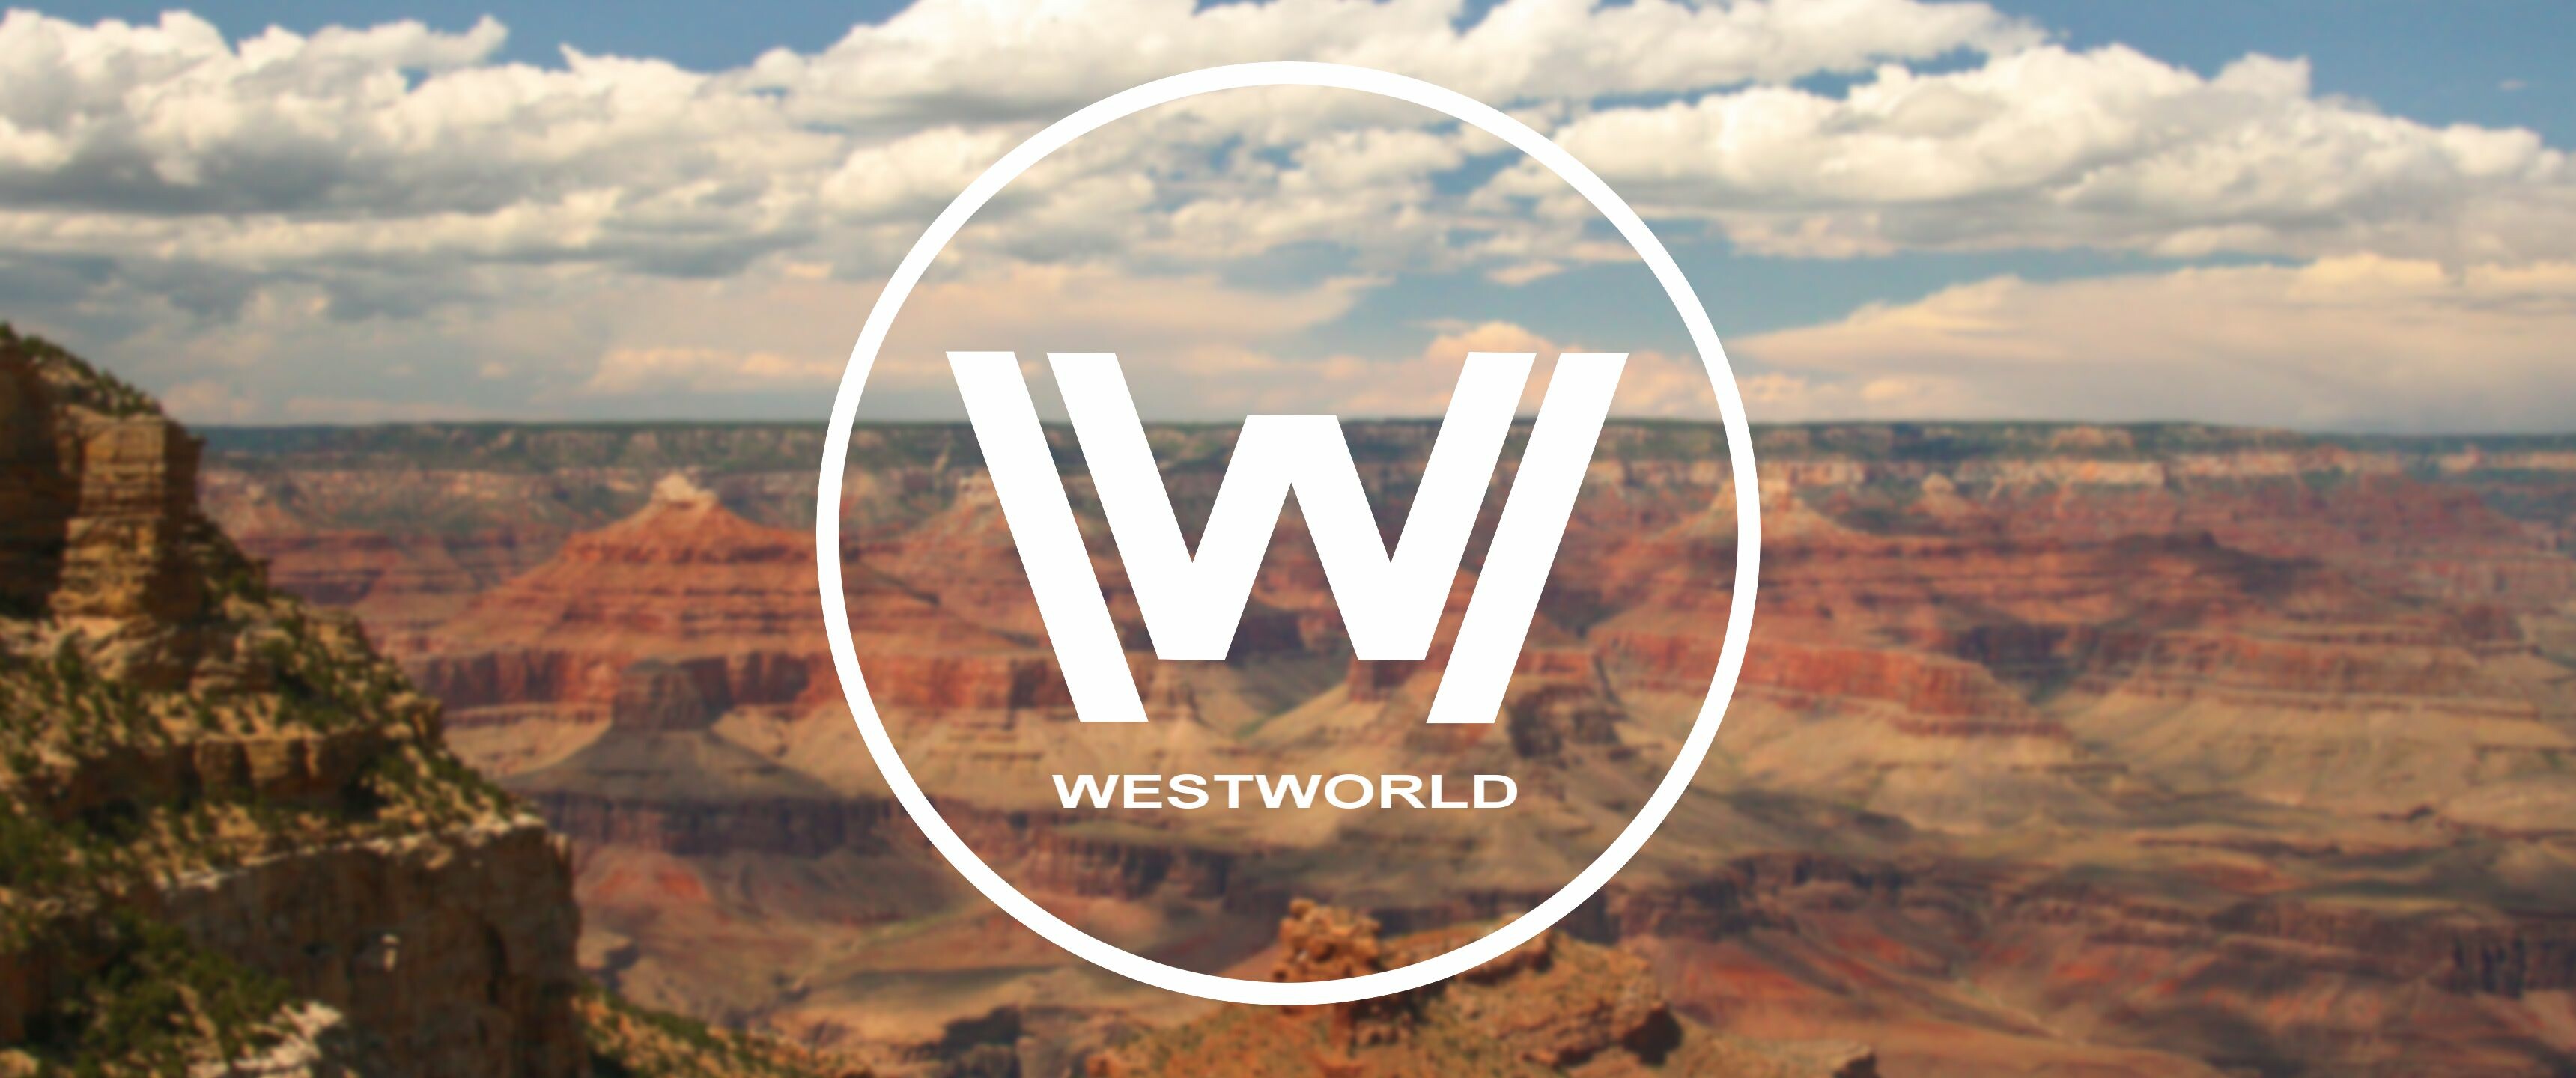 Westworld: An ambitious and highly imaginative drama series that elevates the concept of adventure and thrill-seeking to a new, ultimately dangerous level. 3440x1440 Dual Screen Wallpaper.